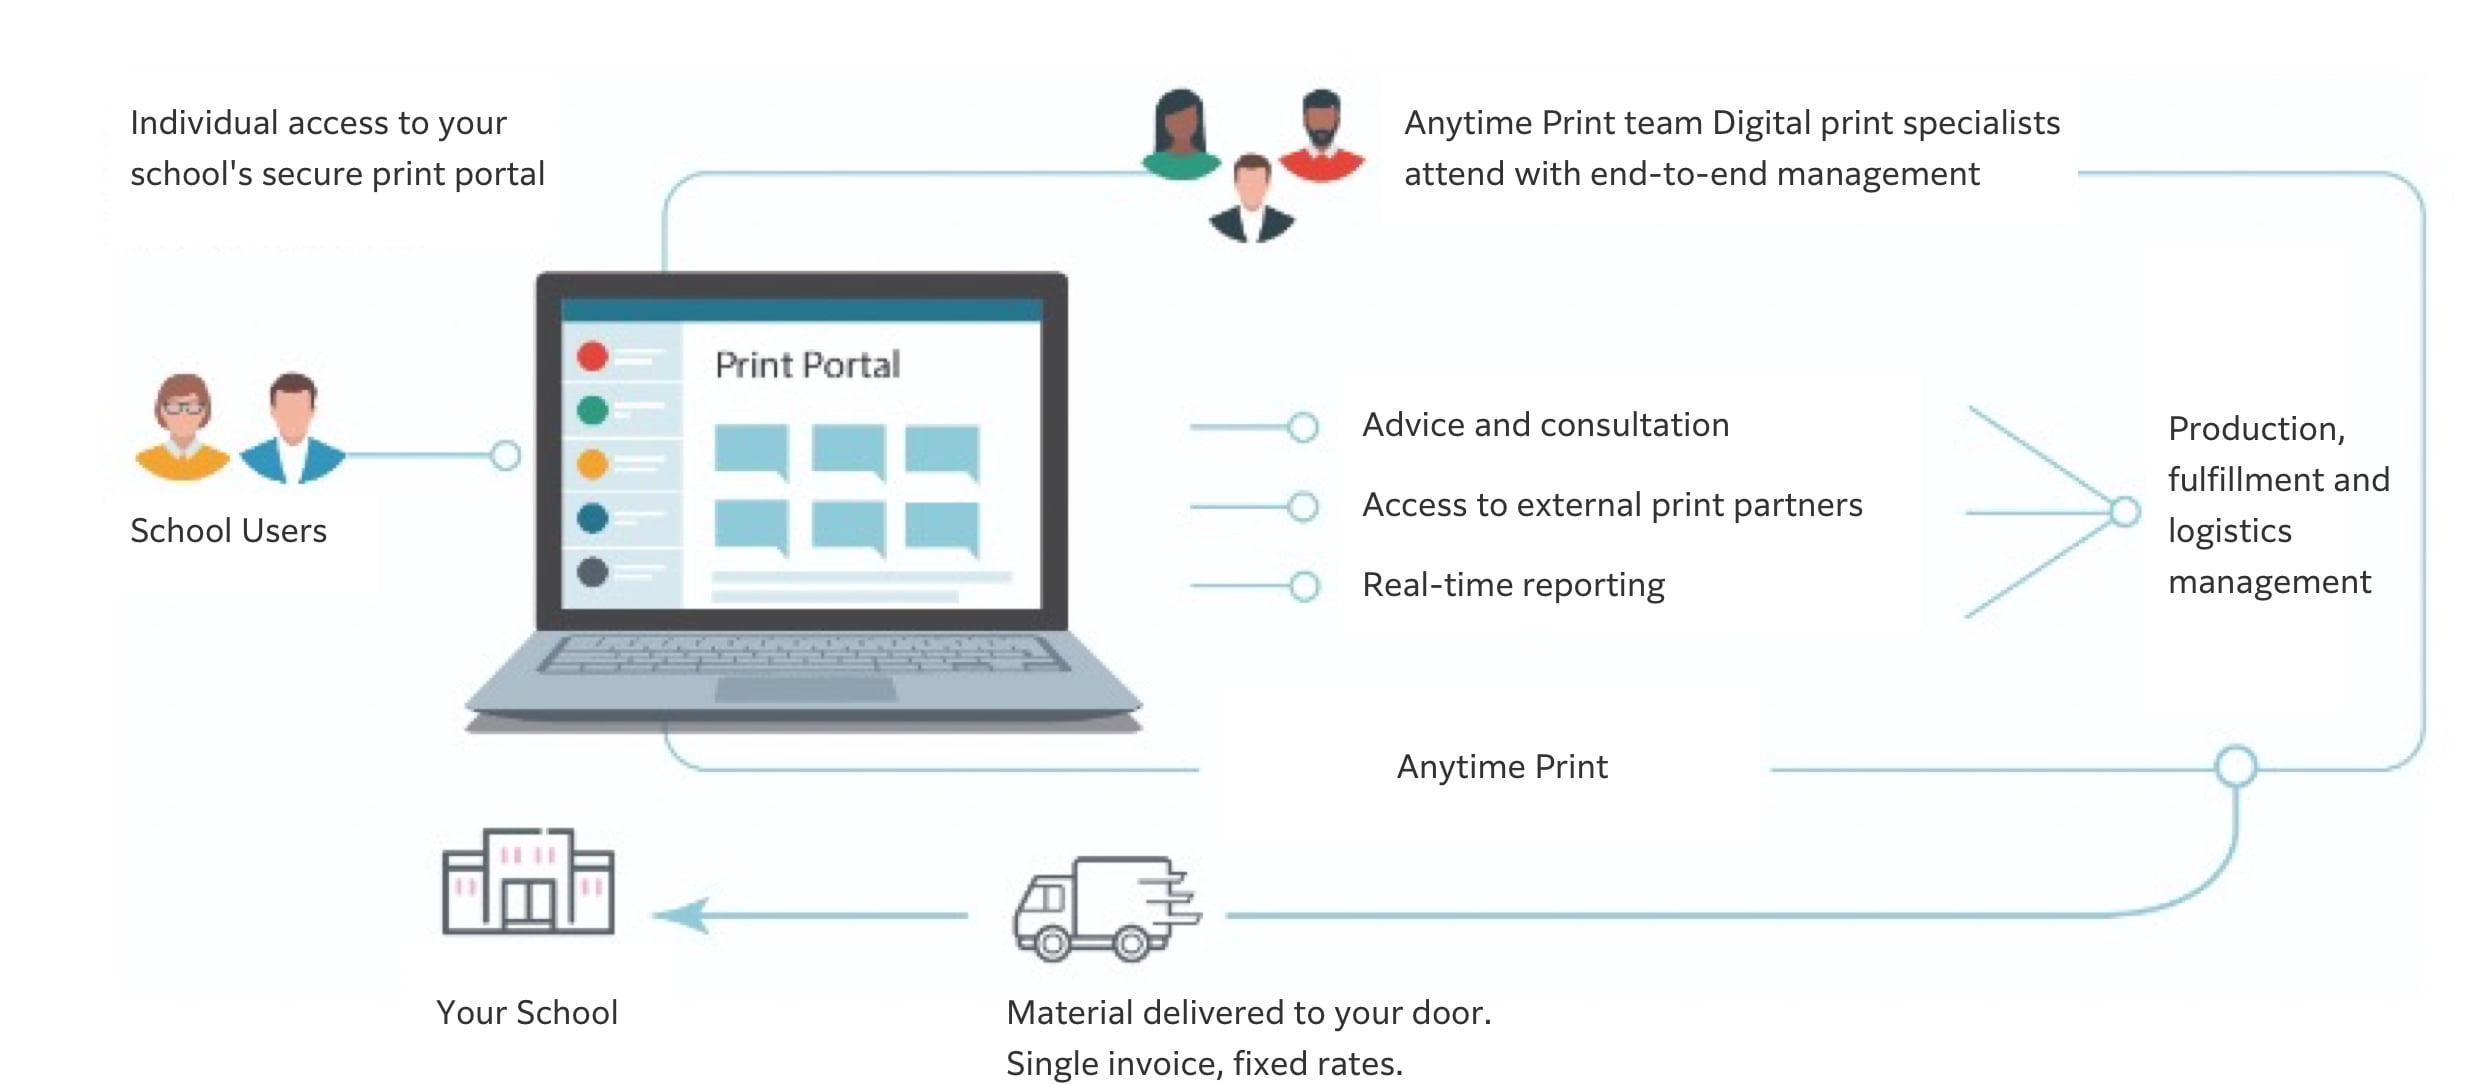 anytime print infographic